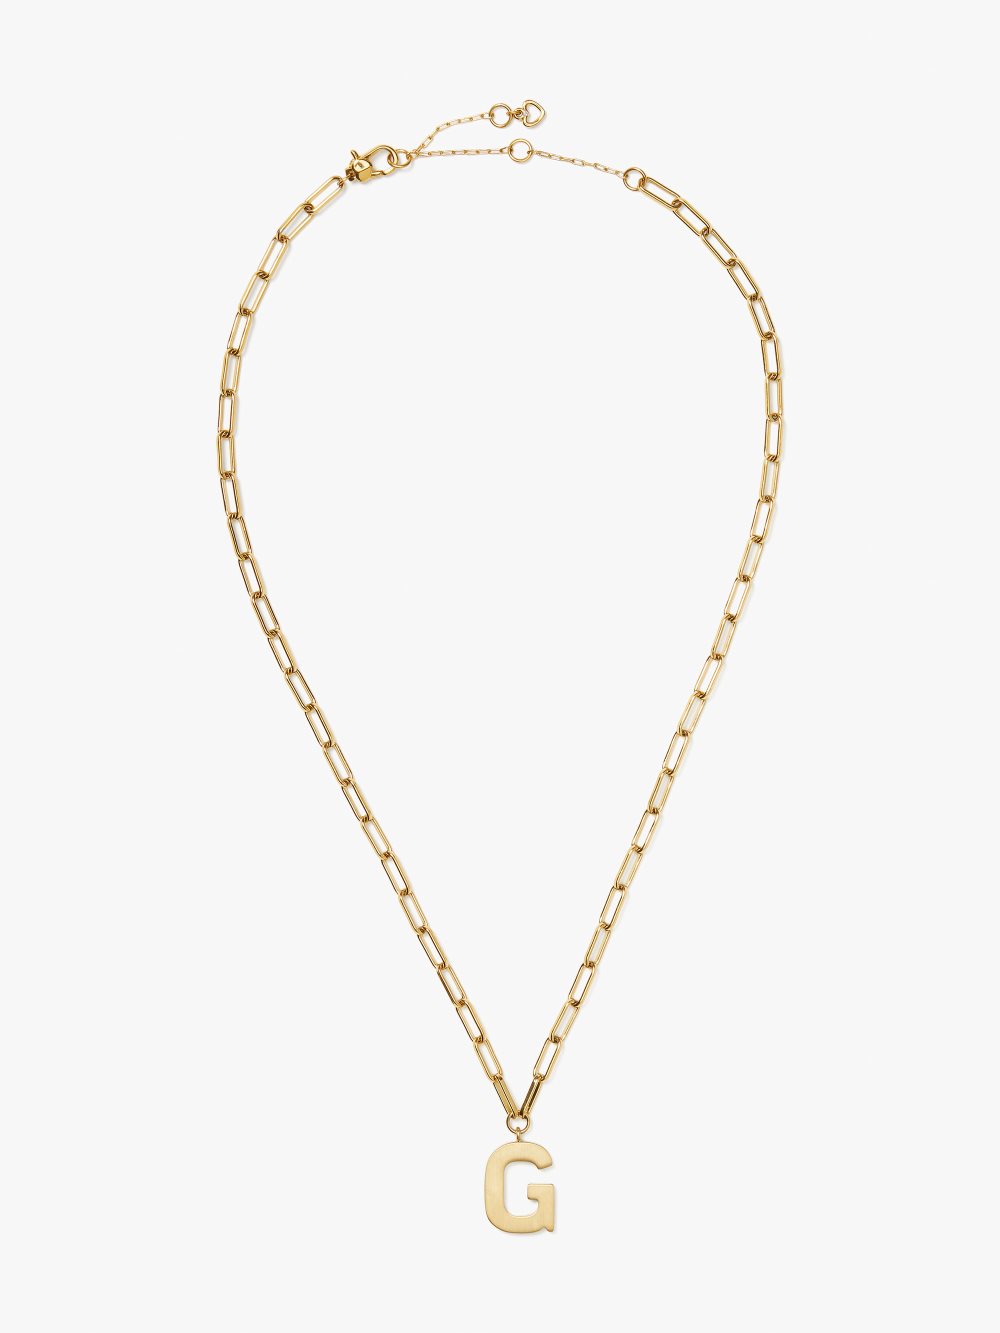 Women's gold. g initial this pendant | Kate Spade